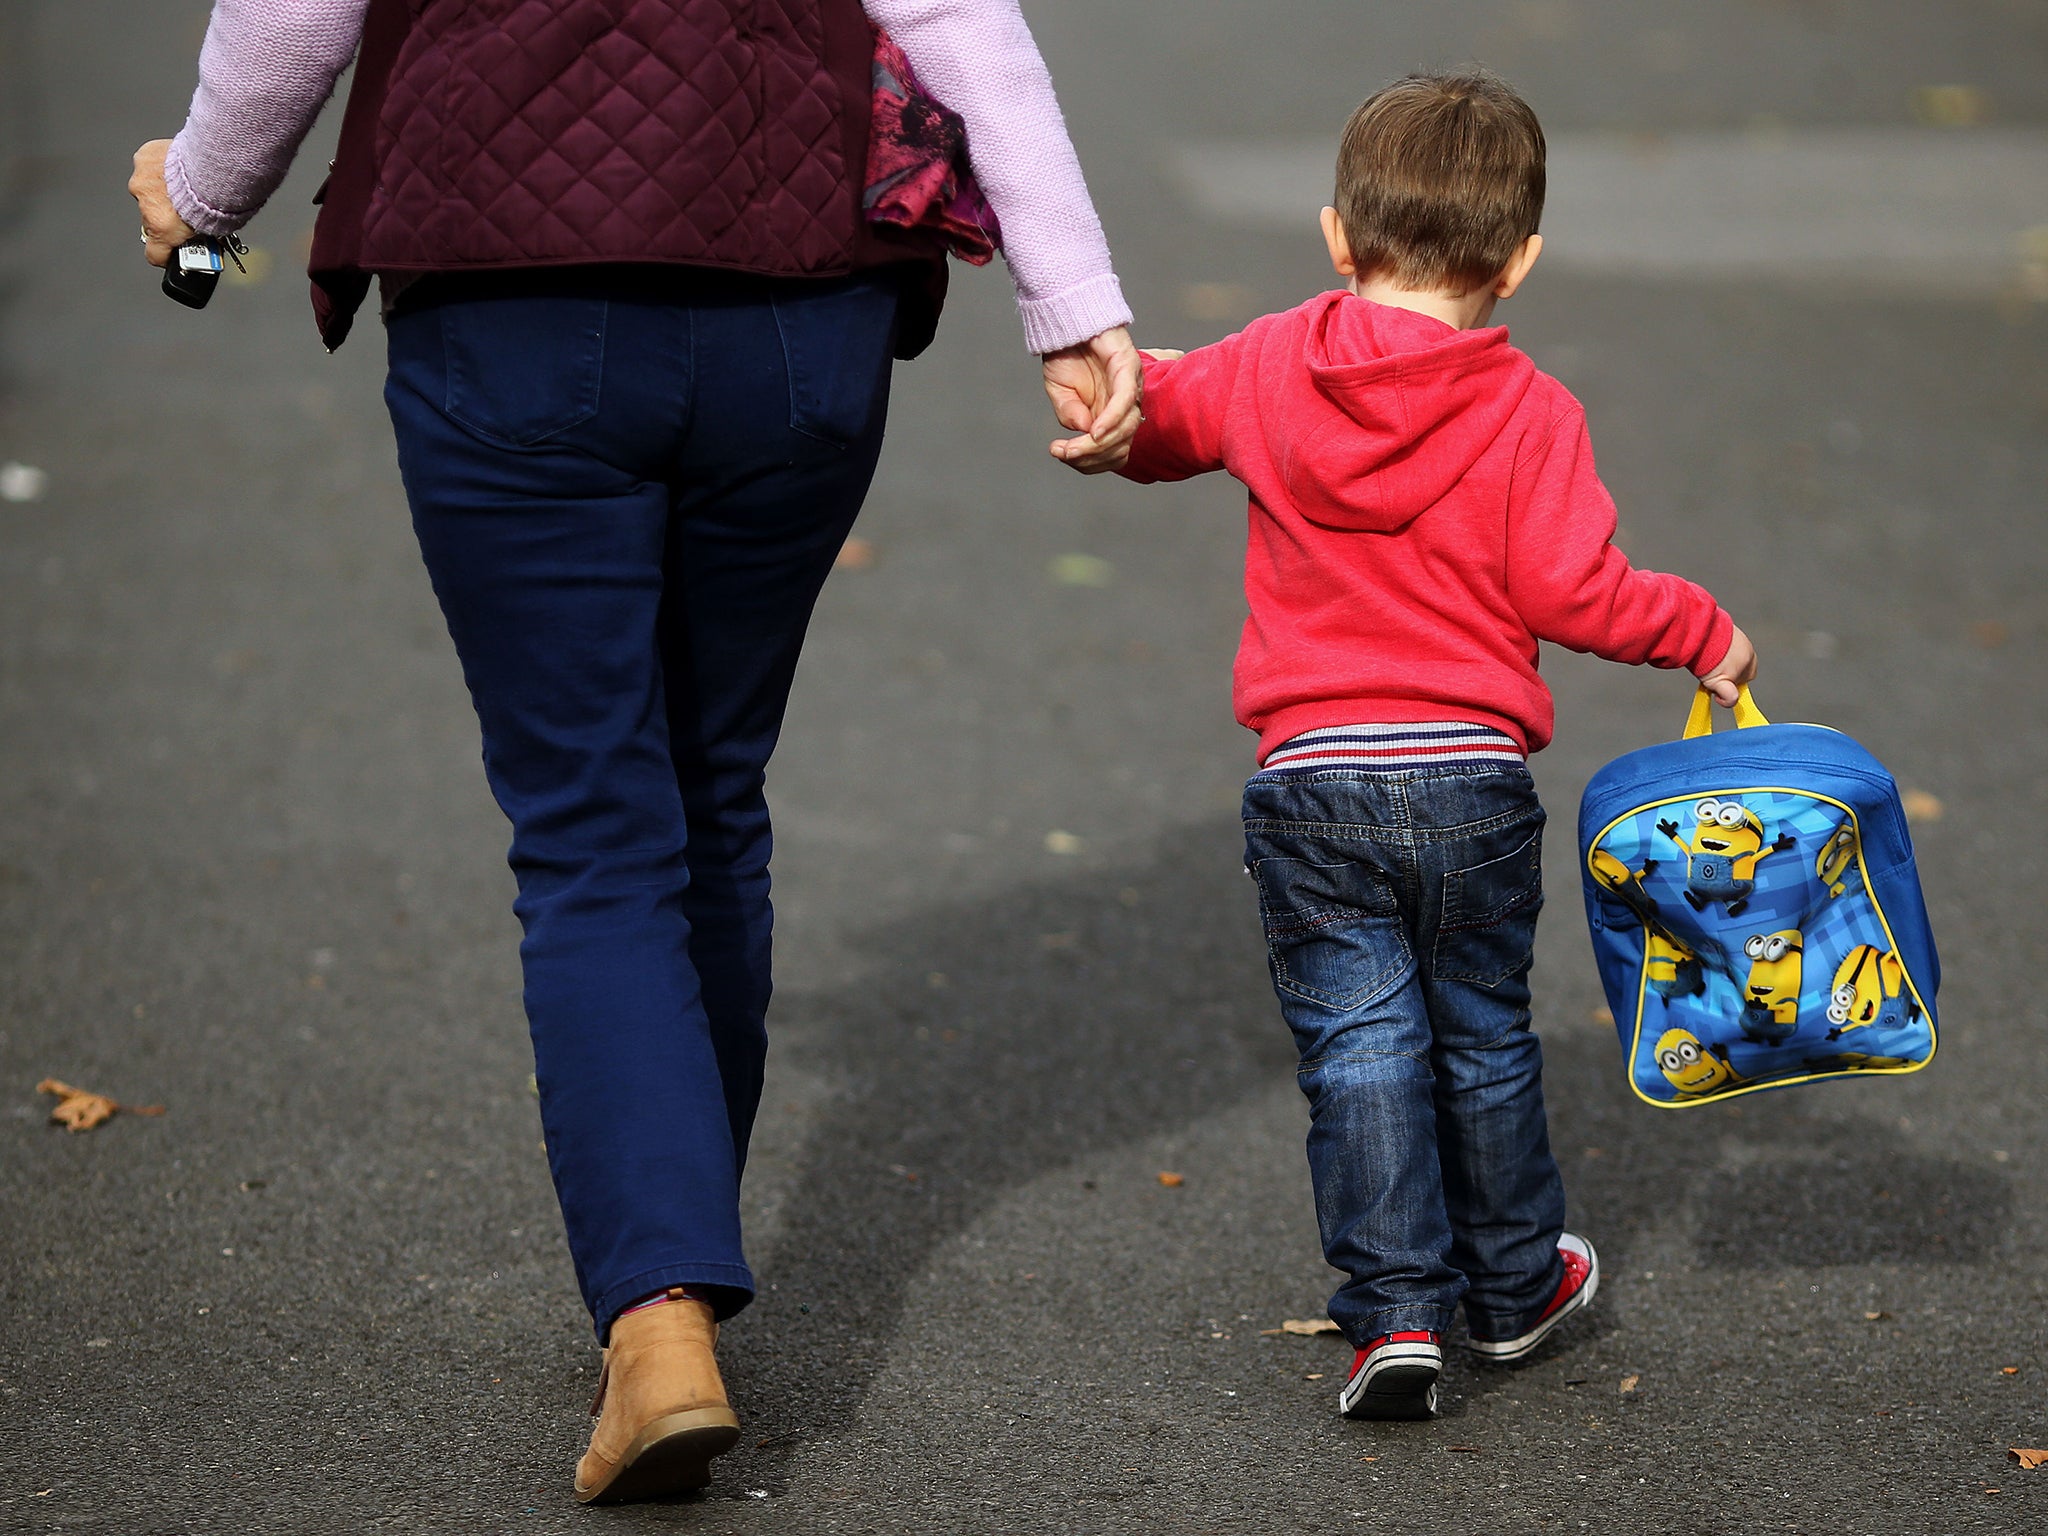 The largest gap in take-up between disadvantaged families and higher-income families are in areas of the country where early years provision is mostly in the private sector